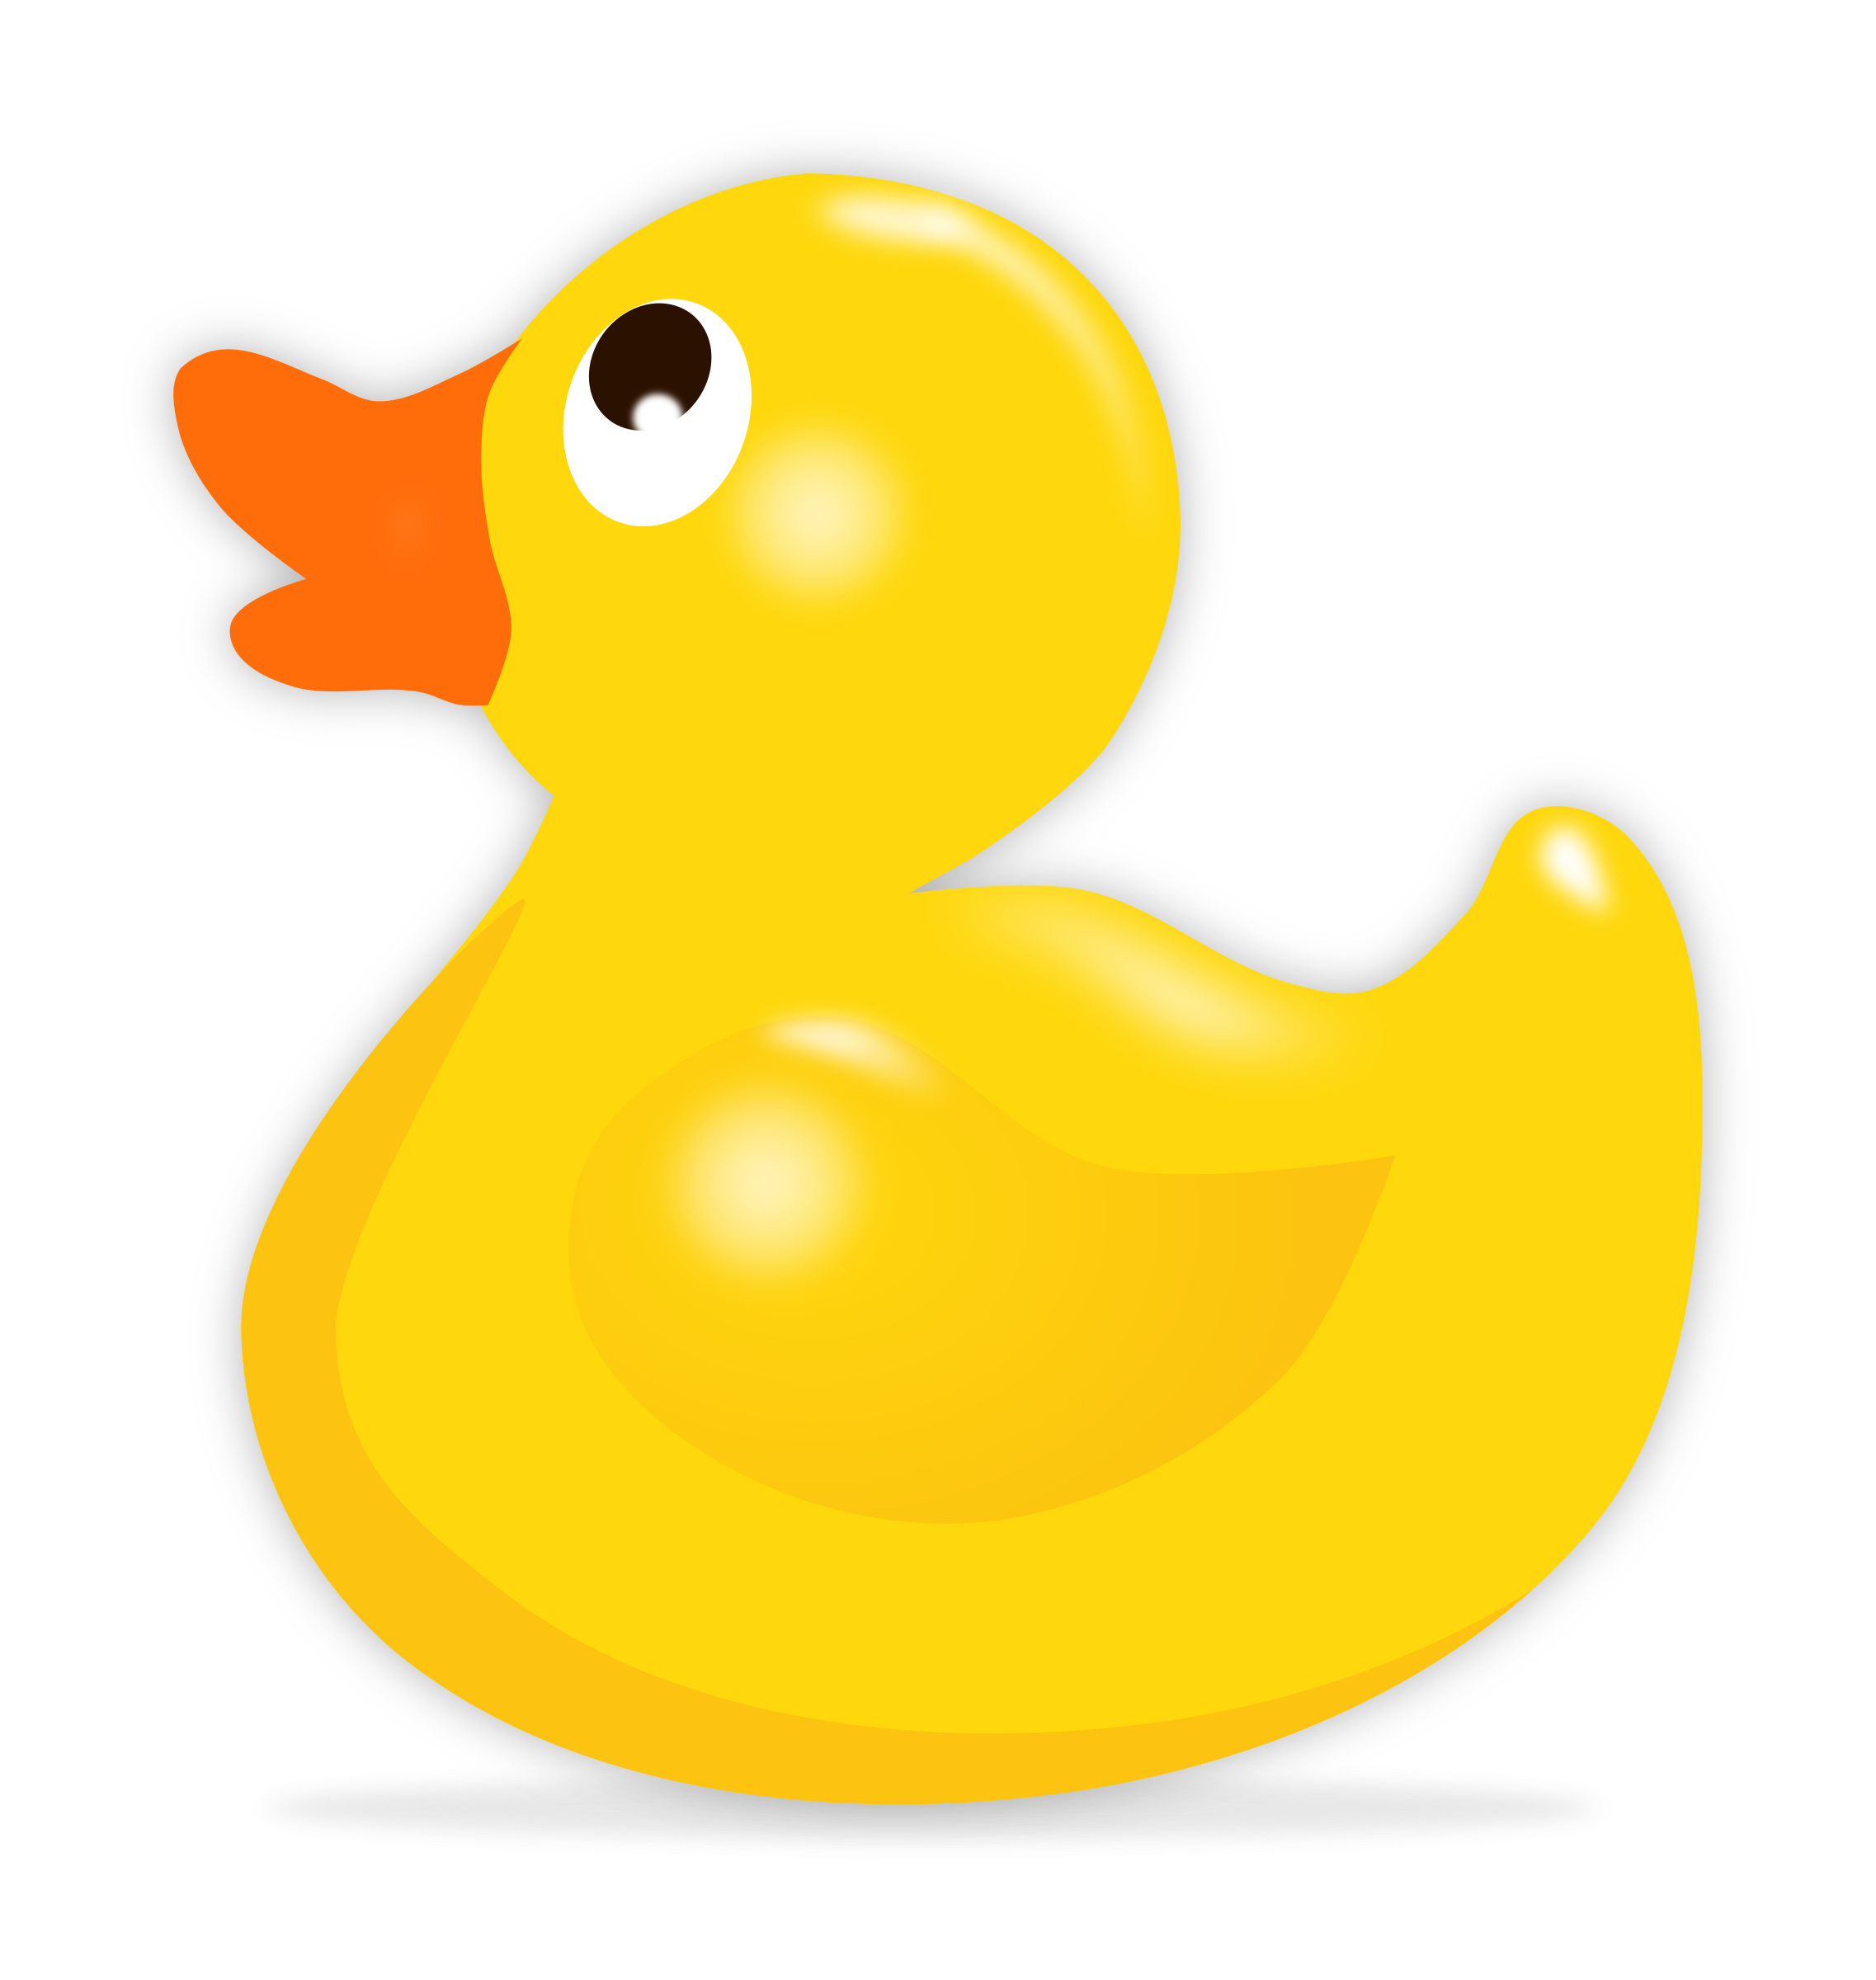 Duckling clipart mummy. Rubber duck png images